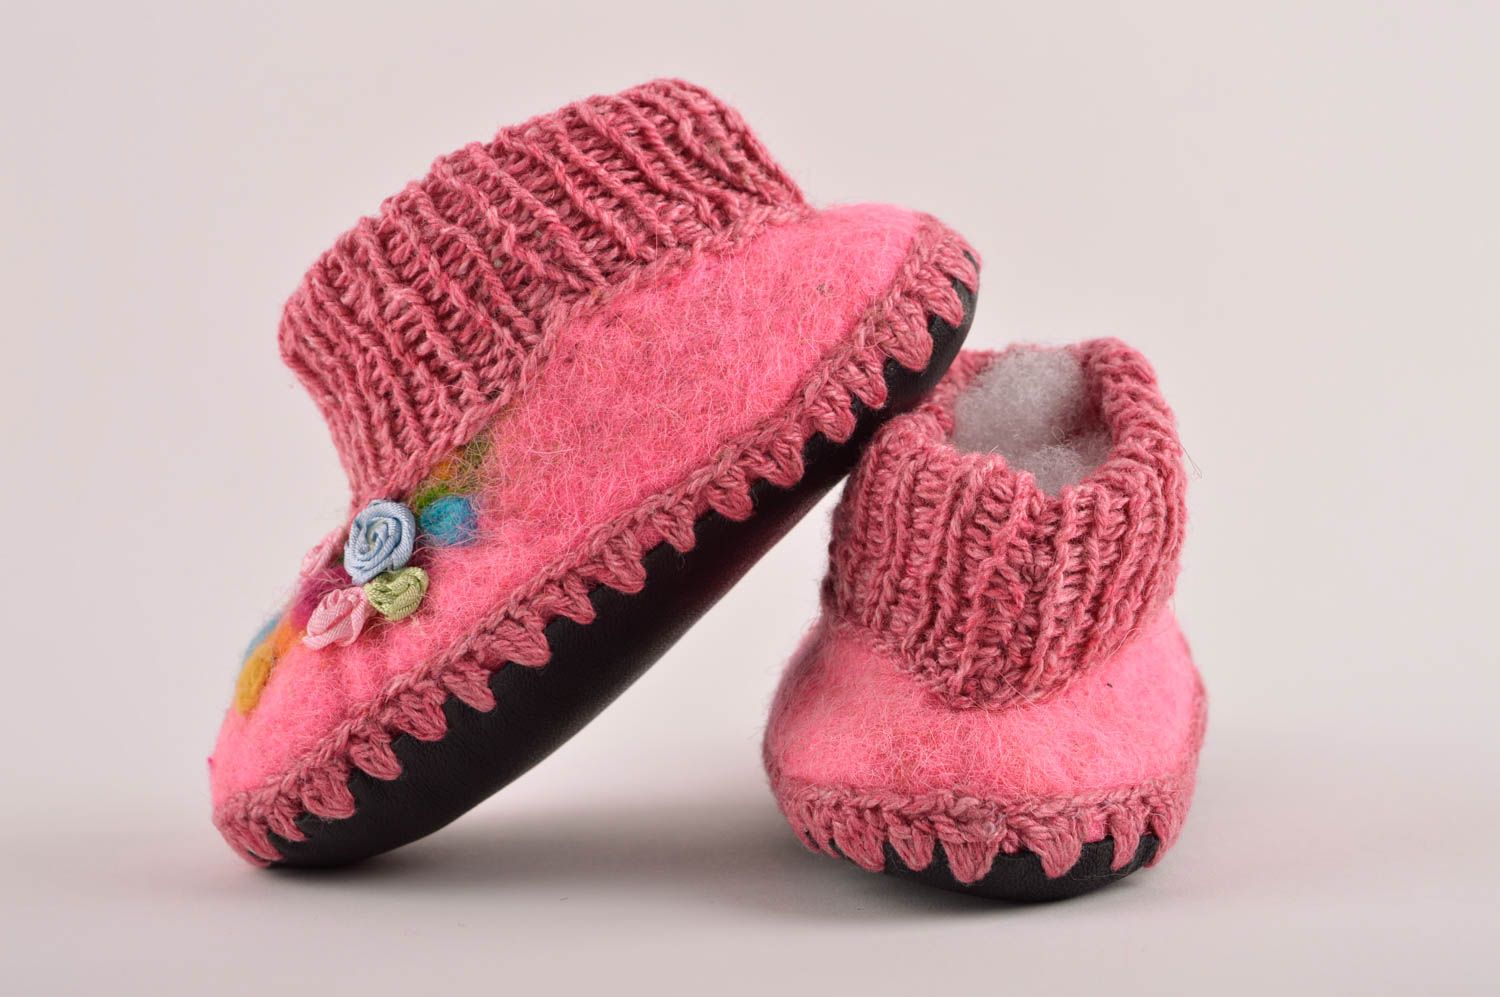 Handmade goods for kids baby shoes baby booties home shoes gifts for kids photo 5